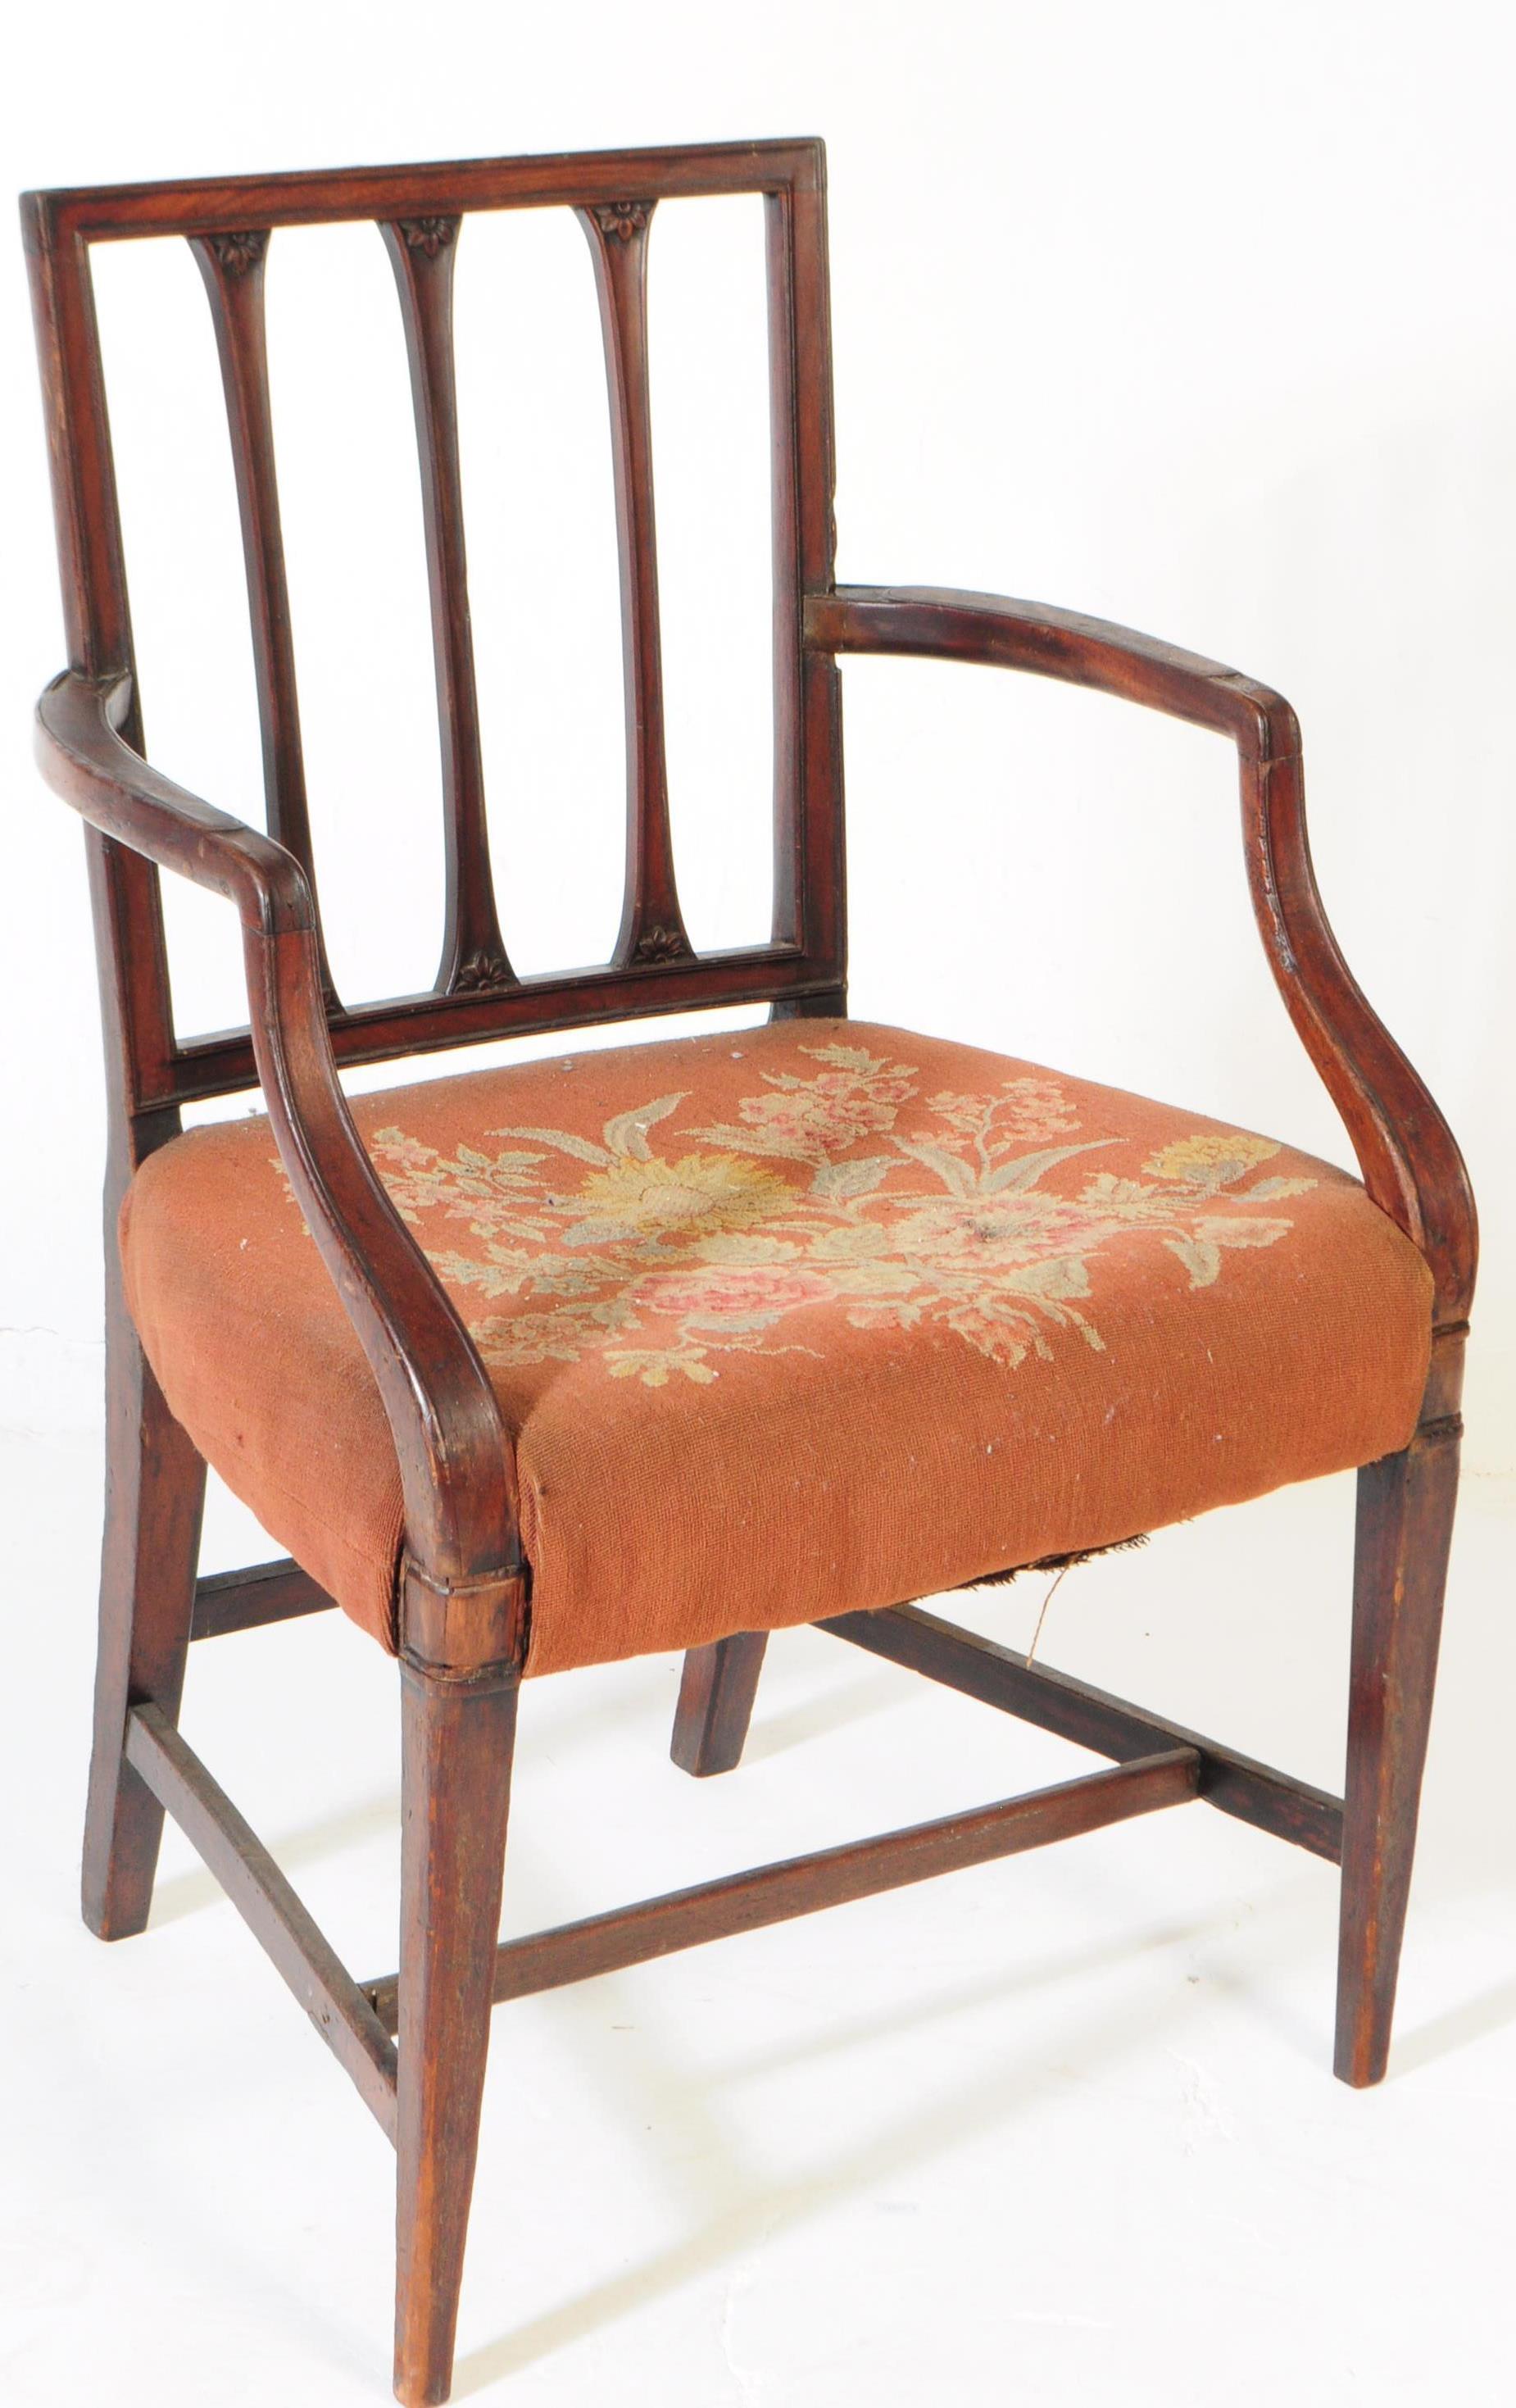 TWO GEORGE III 19TH CENTURY ROSEWOOD DINING CHAIRS - Image 5 of 6